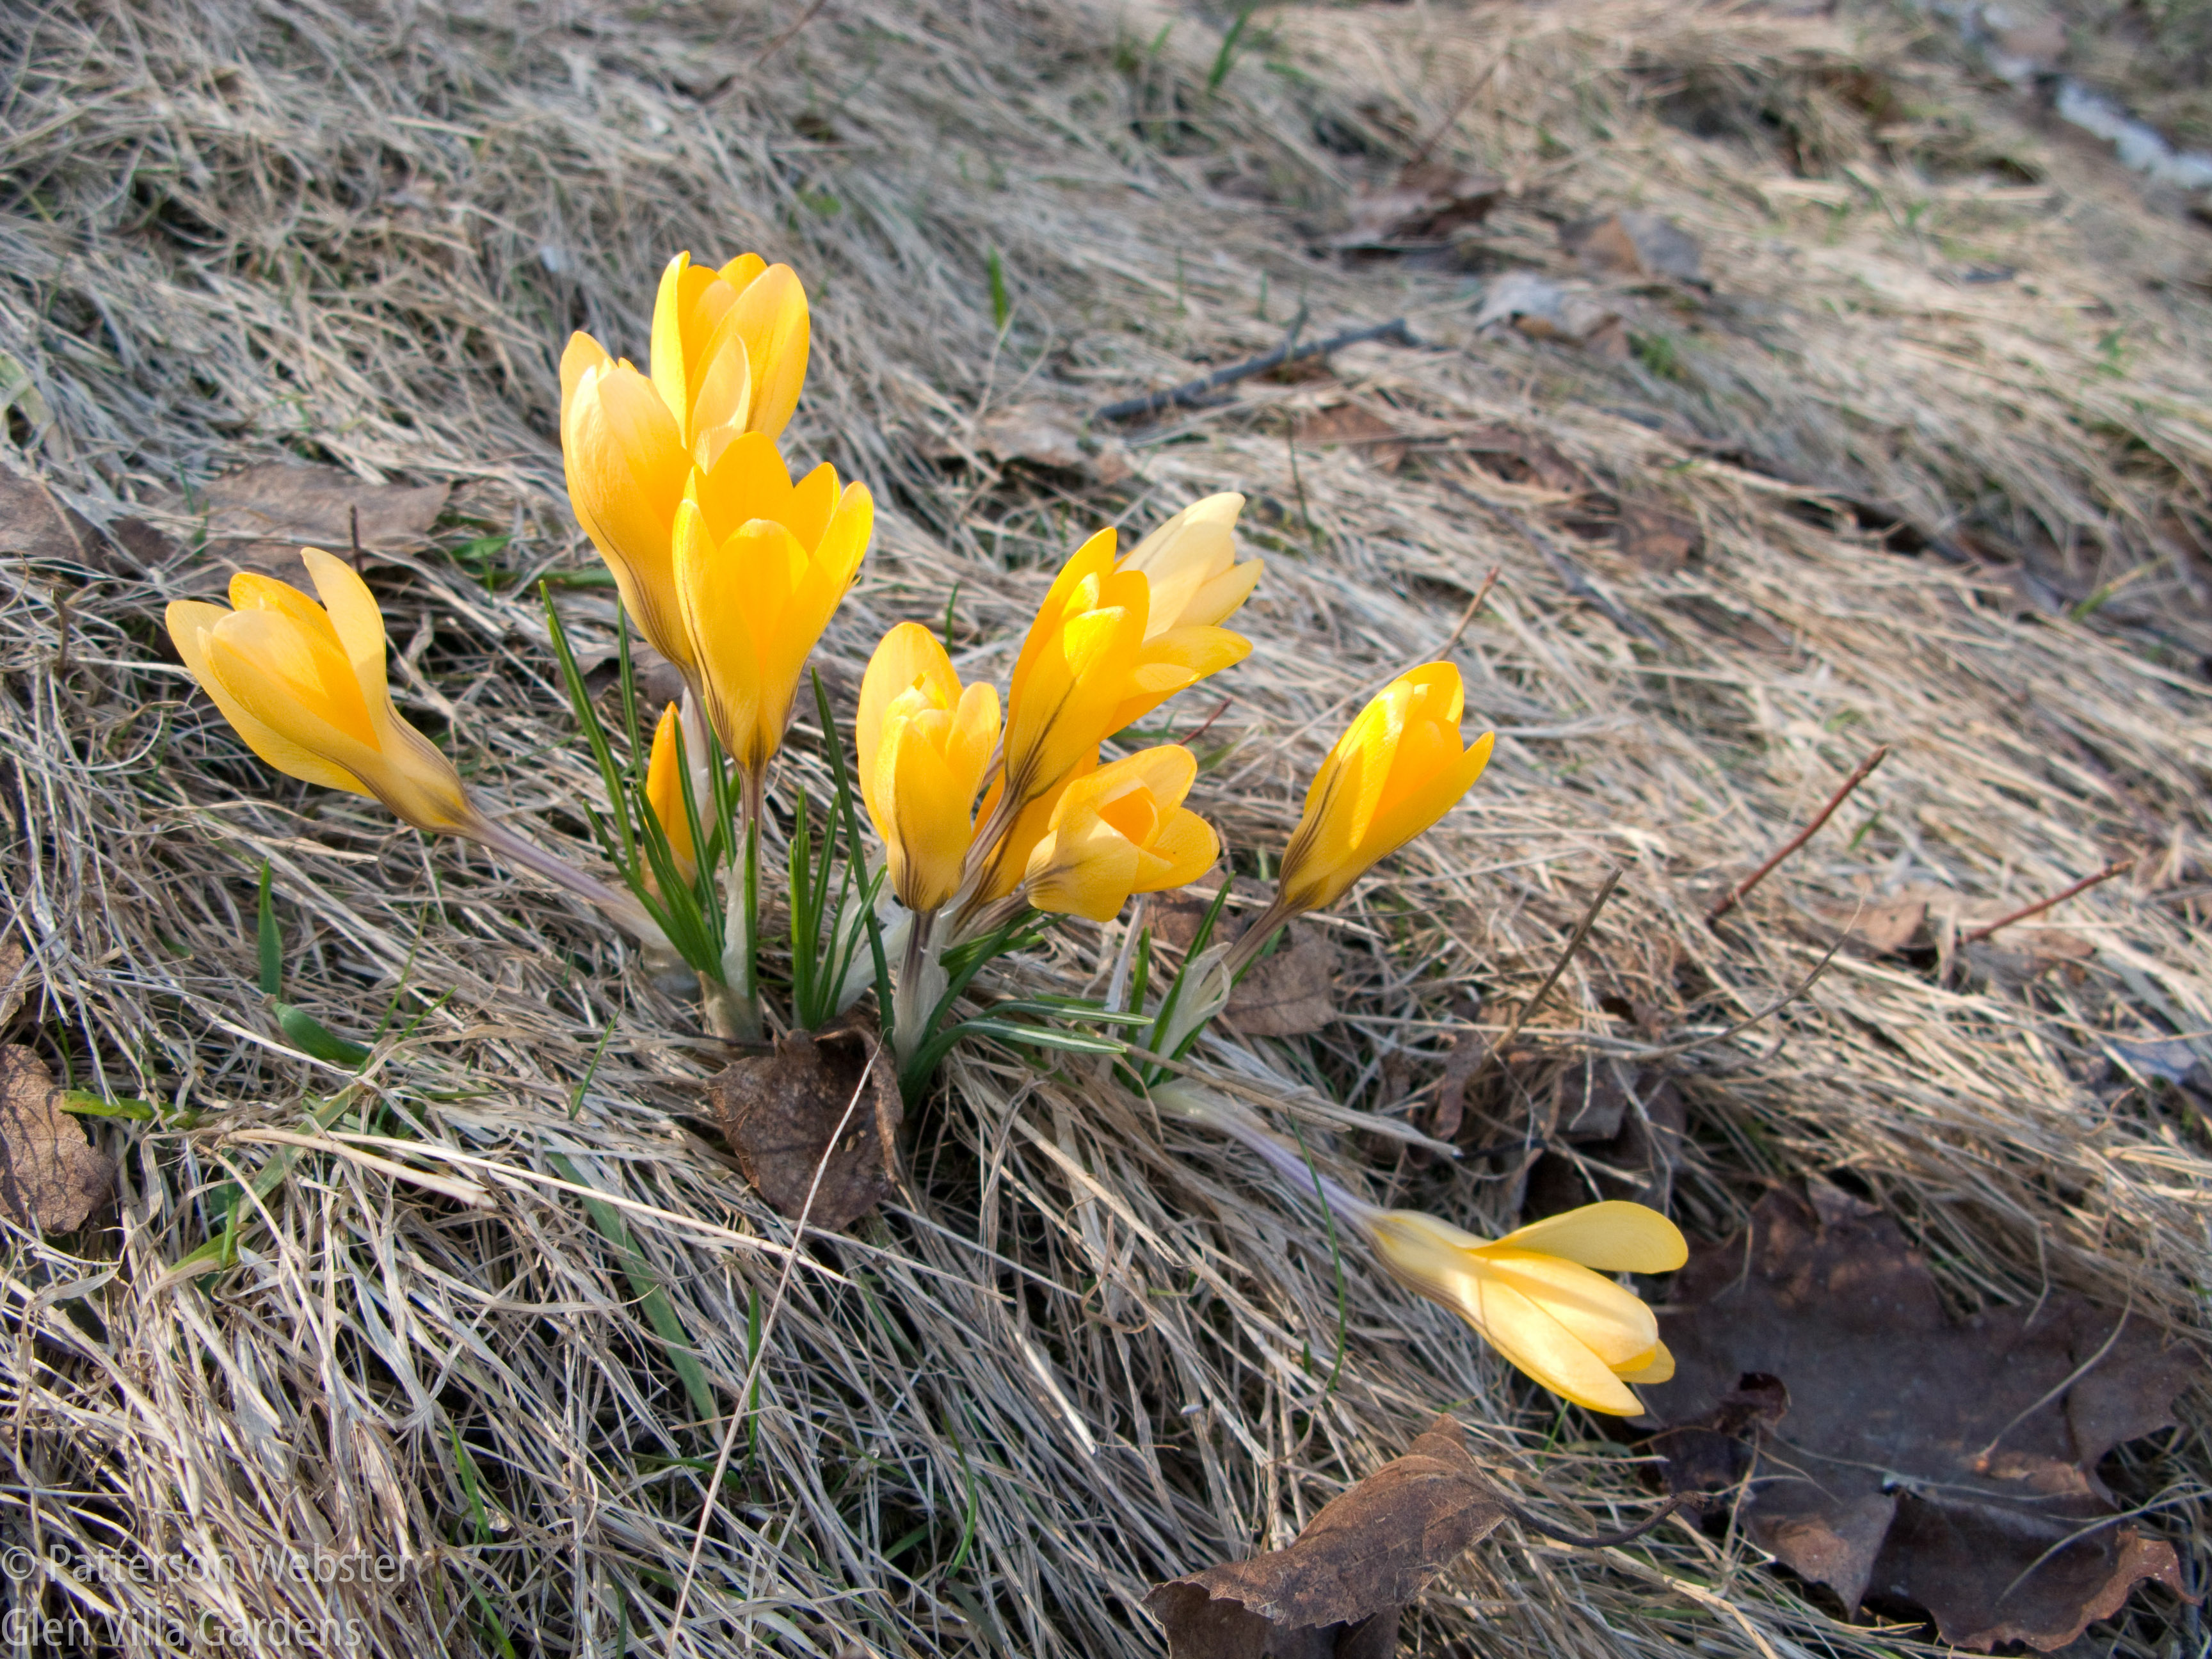 Yellow crocus are sunshine to the soul.